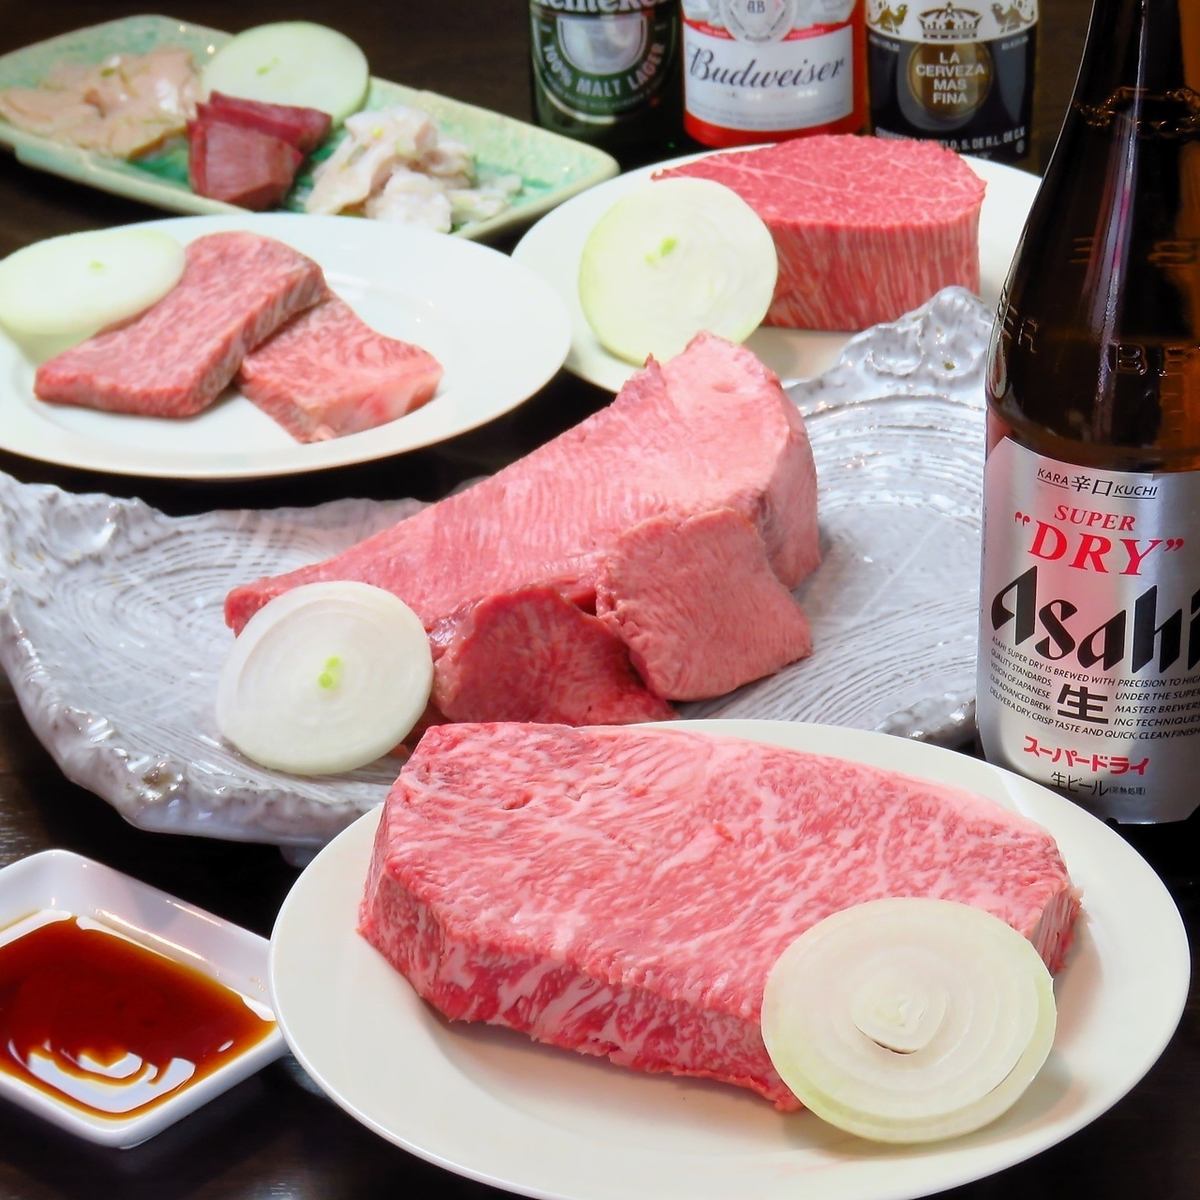 9 minutes walk from Minowa Station! Charcoal-grilled yakiniku is attractive. Courses are also available, so it's perfect for parties.